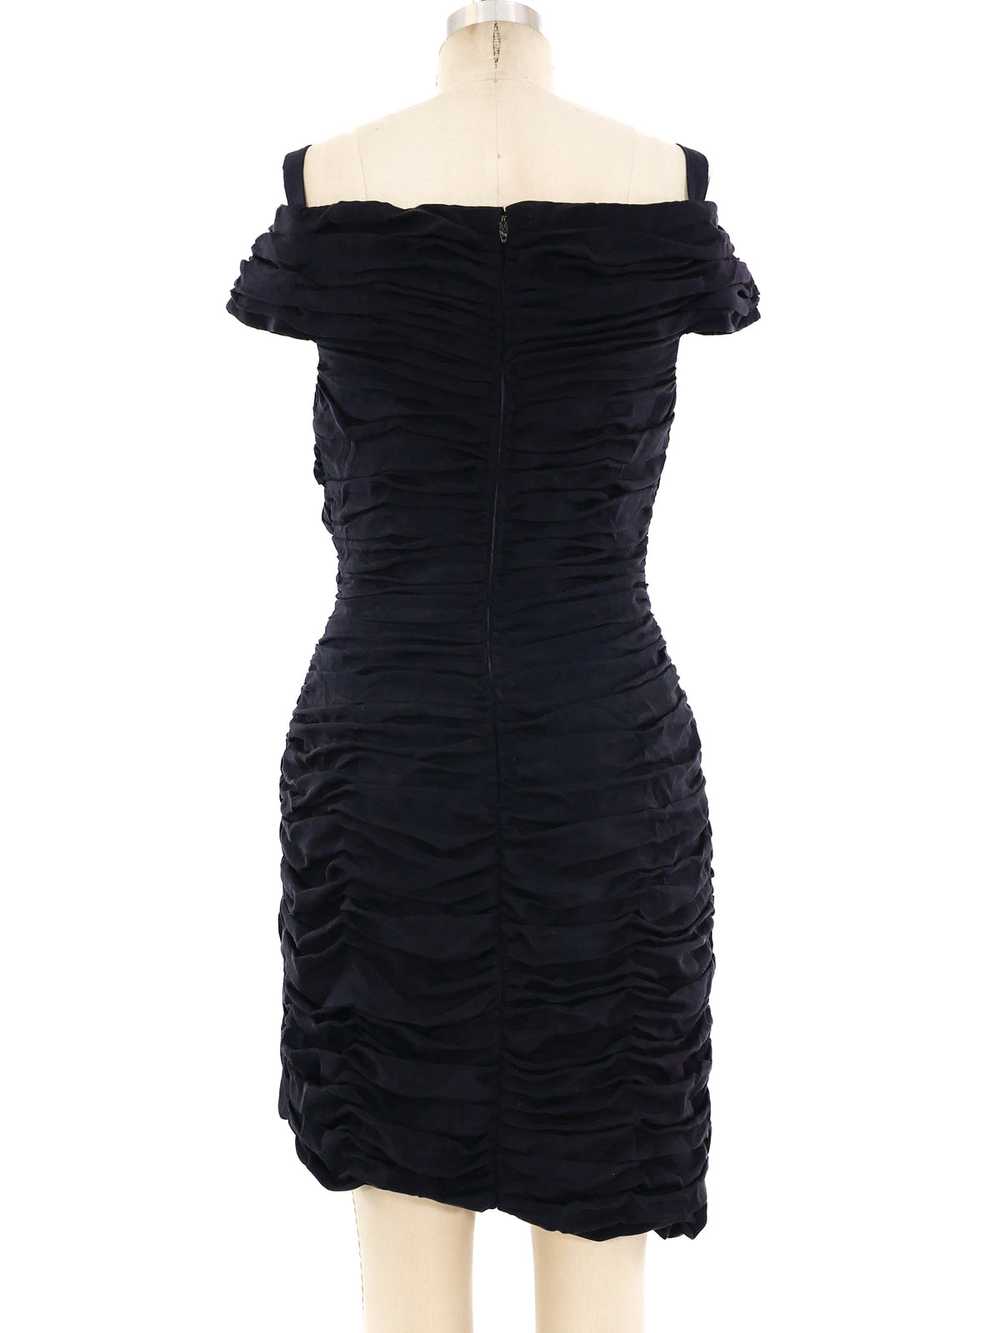 Arnold Scaasi Ruched Mini Dress - image 5